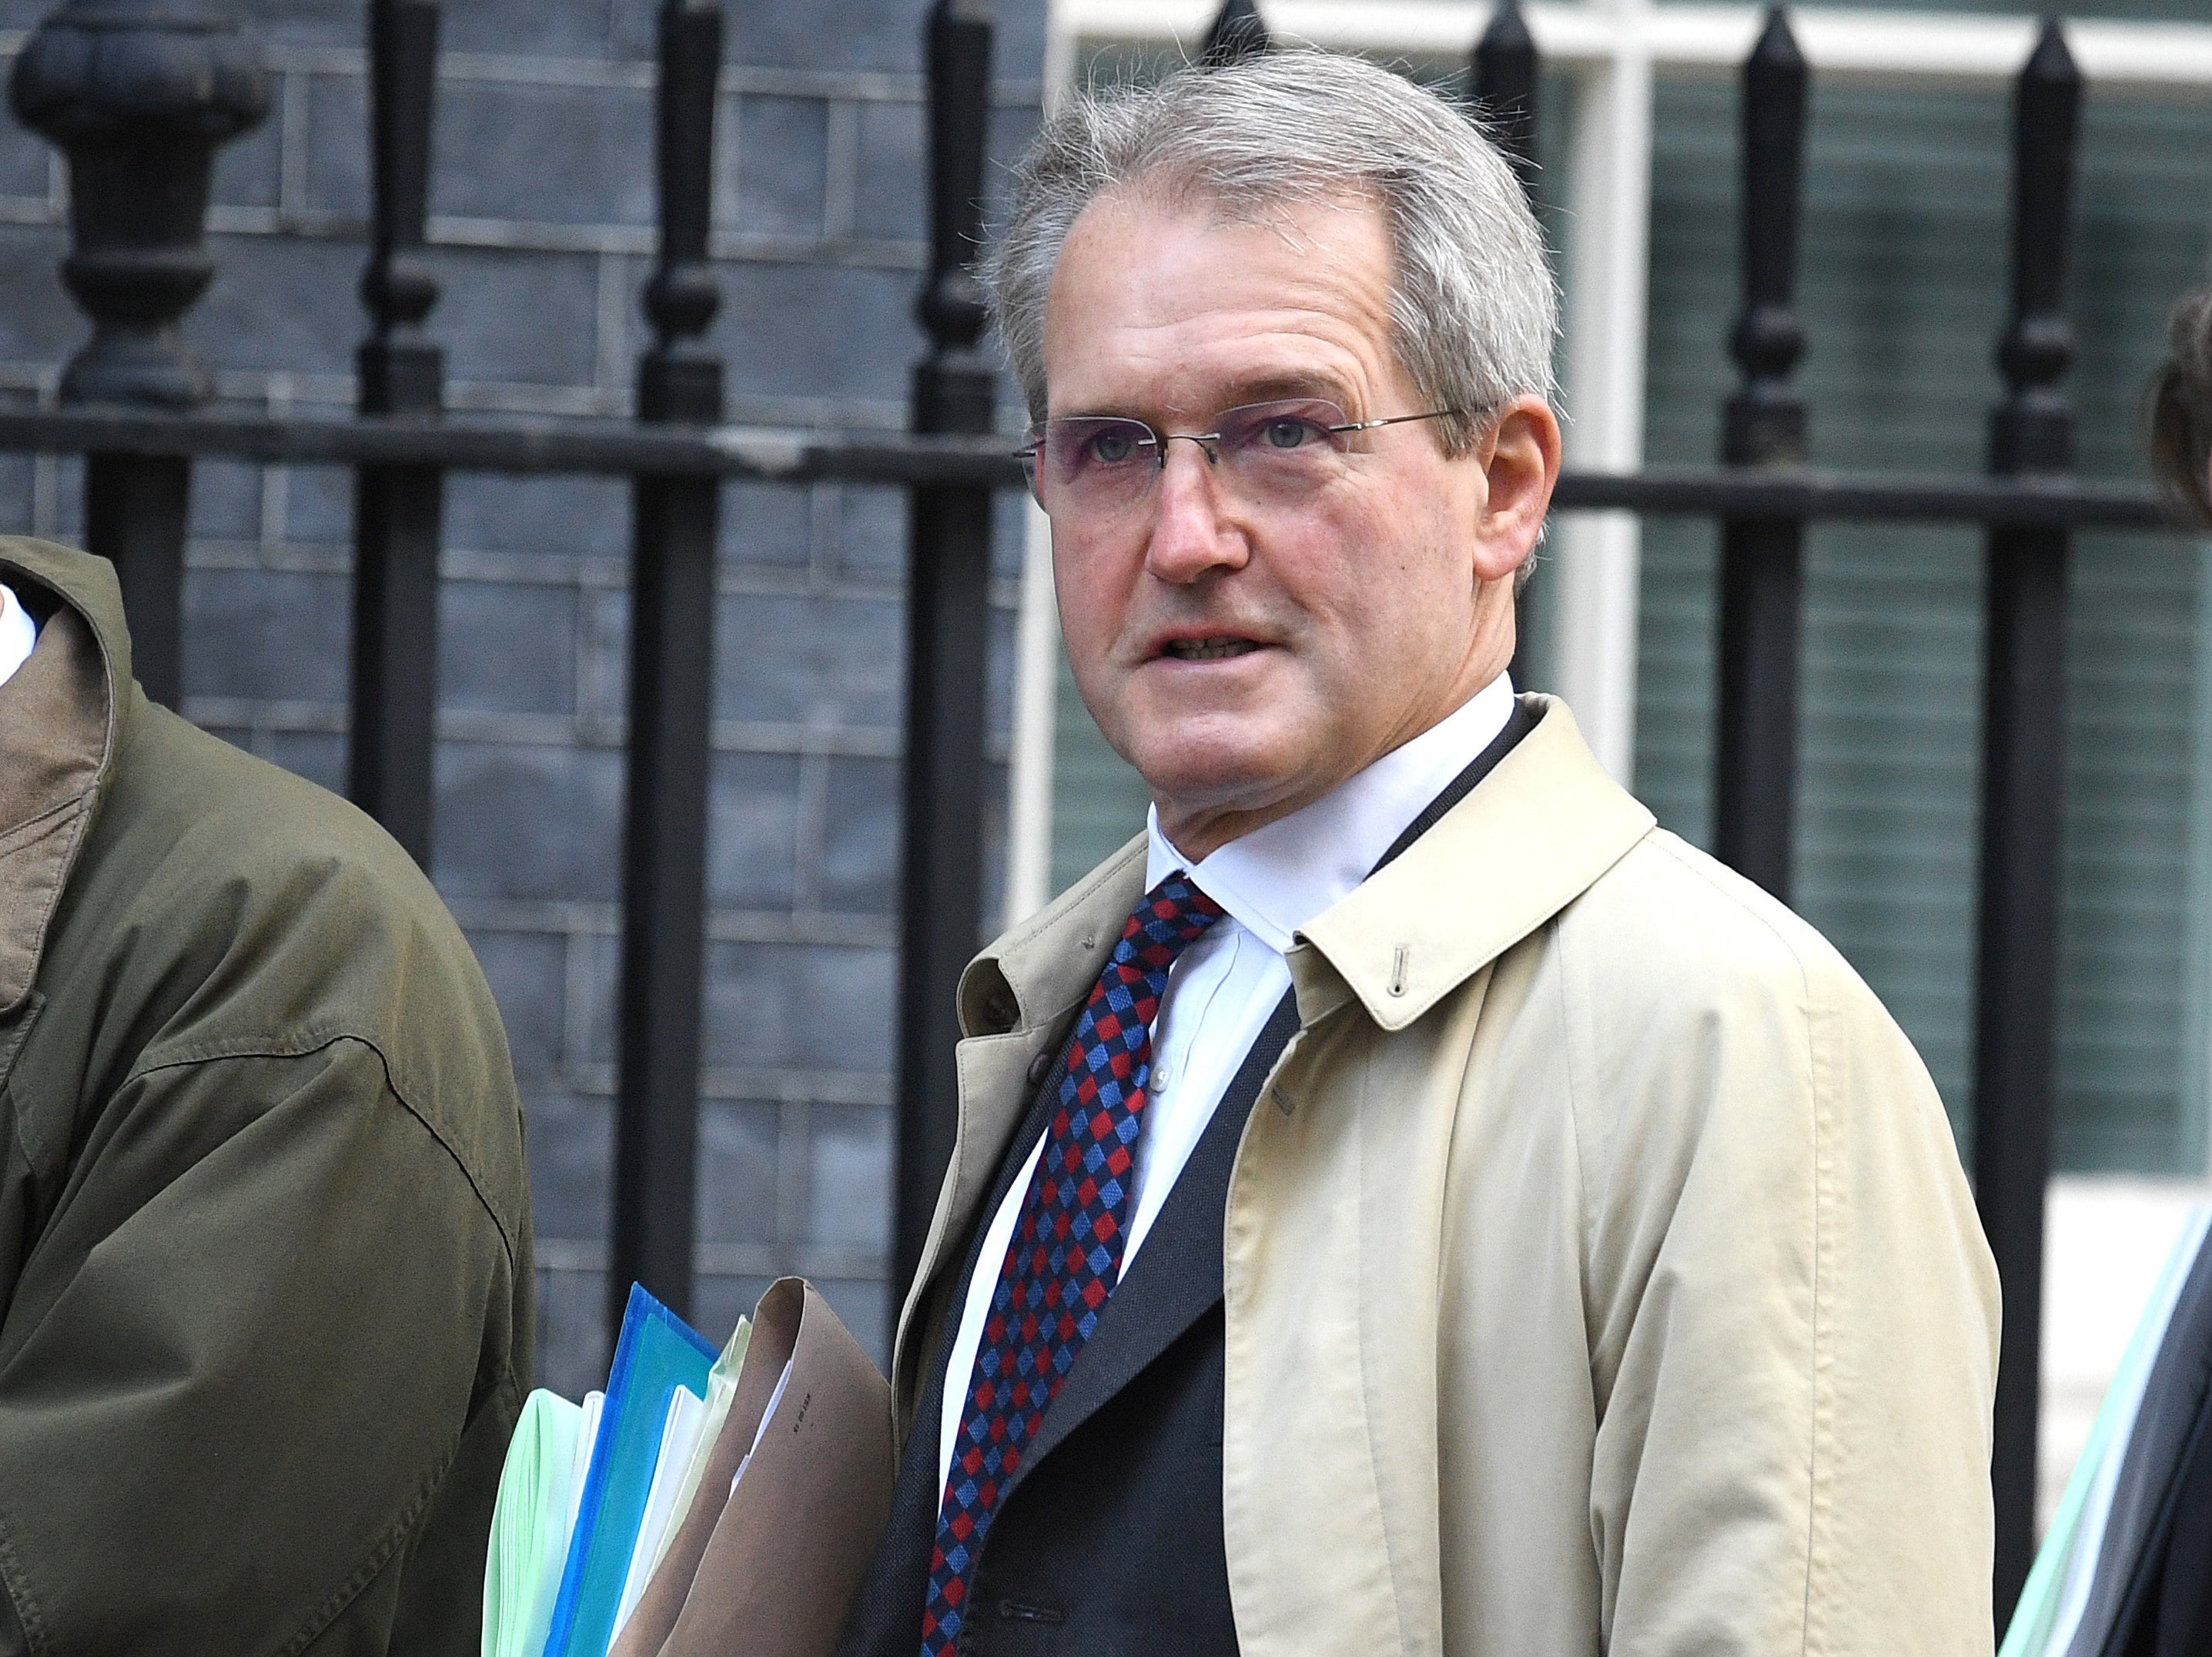 Owen Paterson resigned as MP for North Shropshire in the fallout